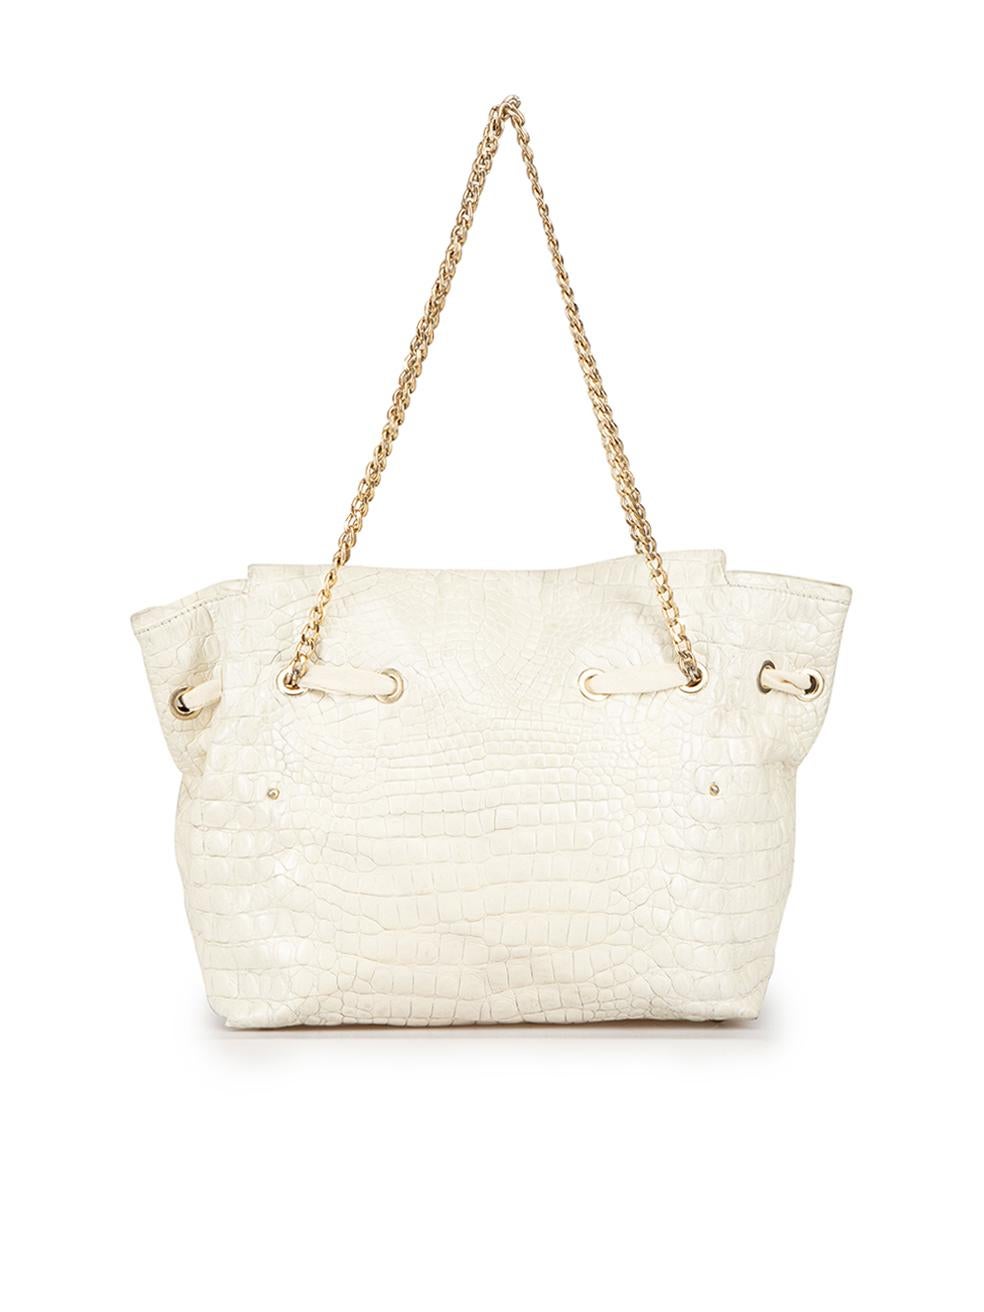 Jimmy Choo White Leather Croc Embossed Rhea Tote In Good Condition For Sale In London, GB